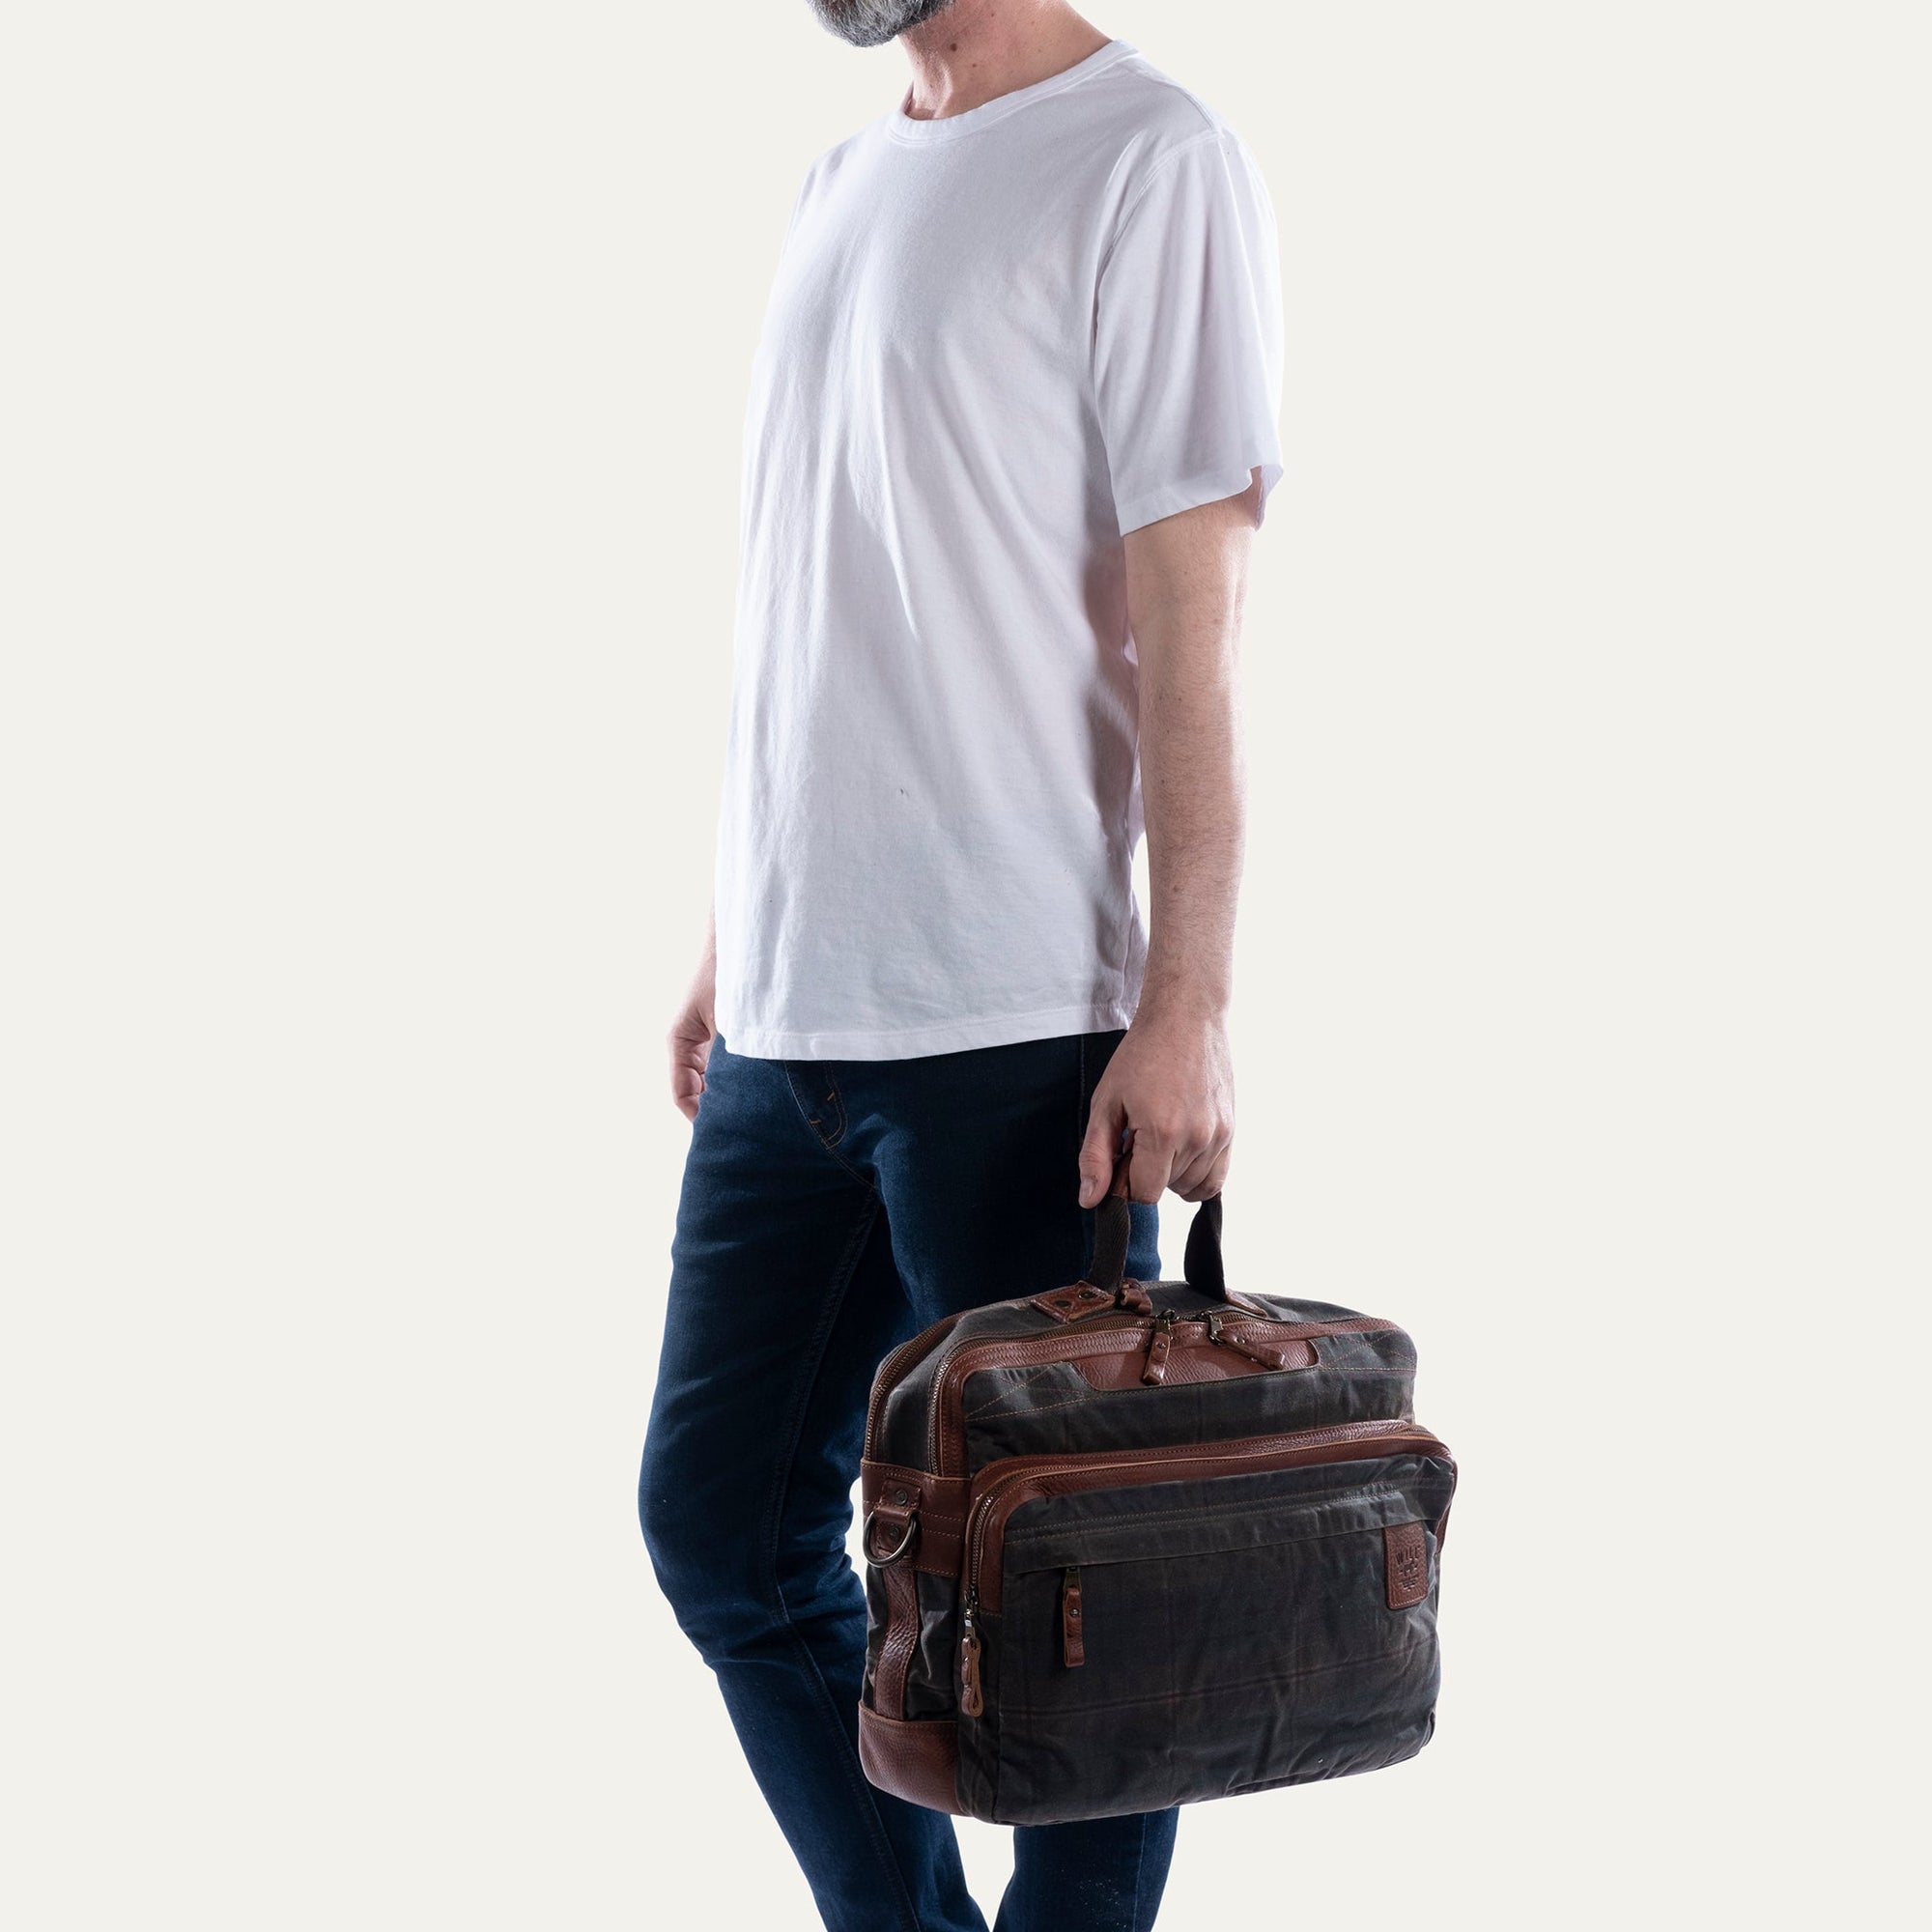 Waxed Canvas and Leather 'Adventure Collection' Commuter Bag in Mahogany/Tan Plaid by Will Leather Goods